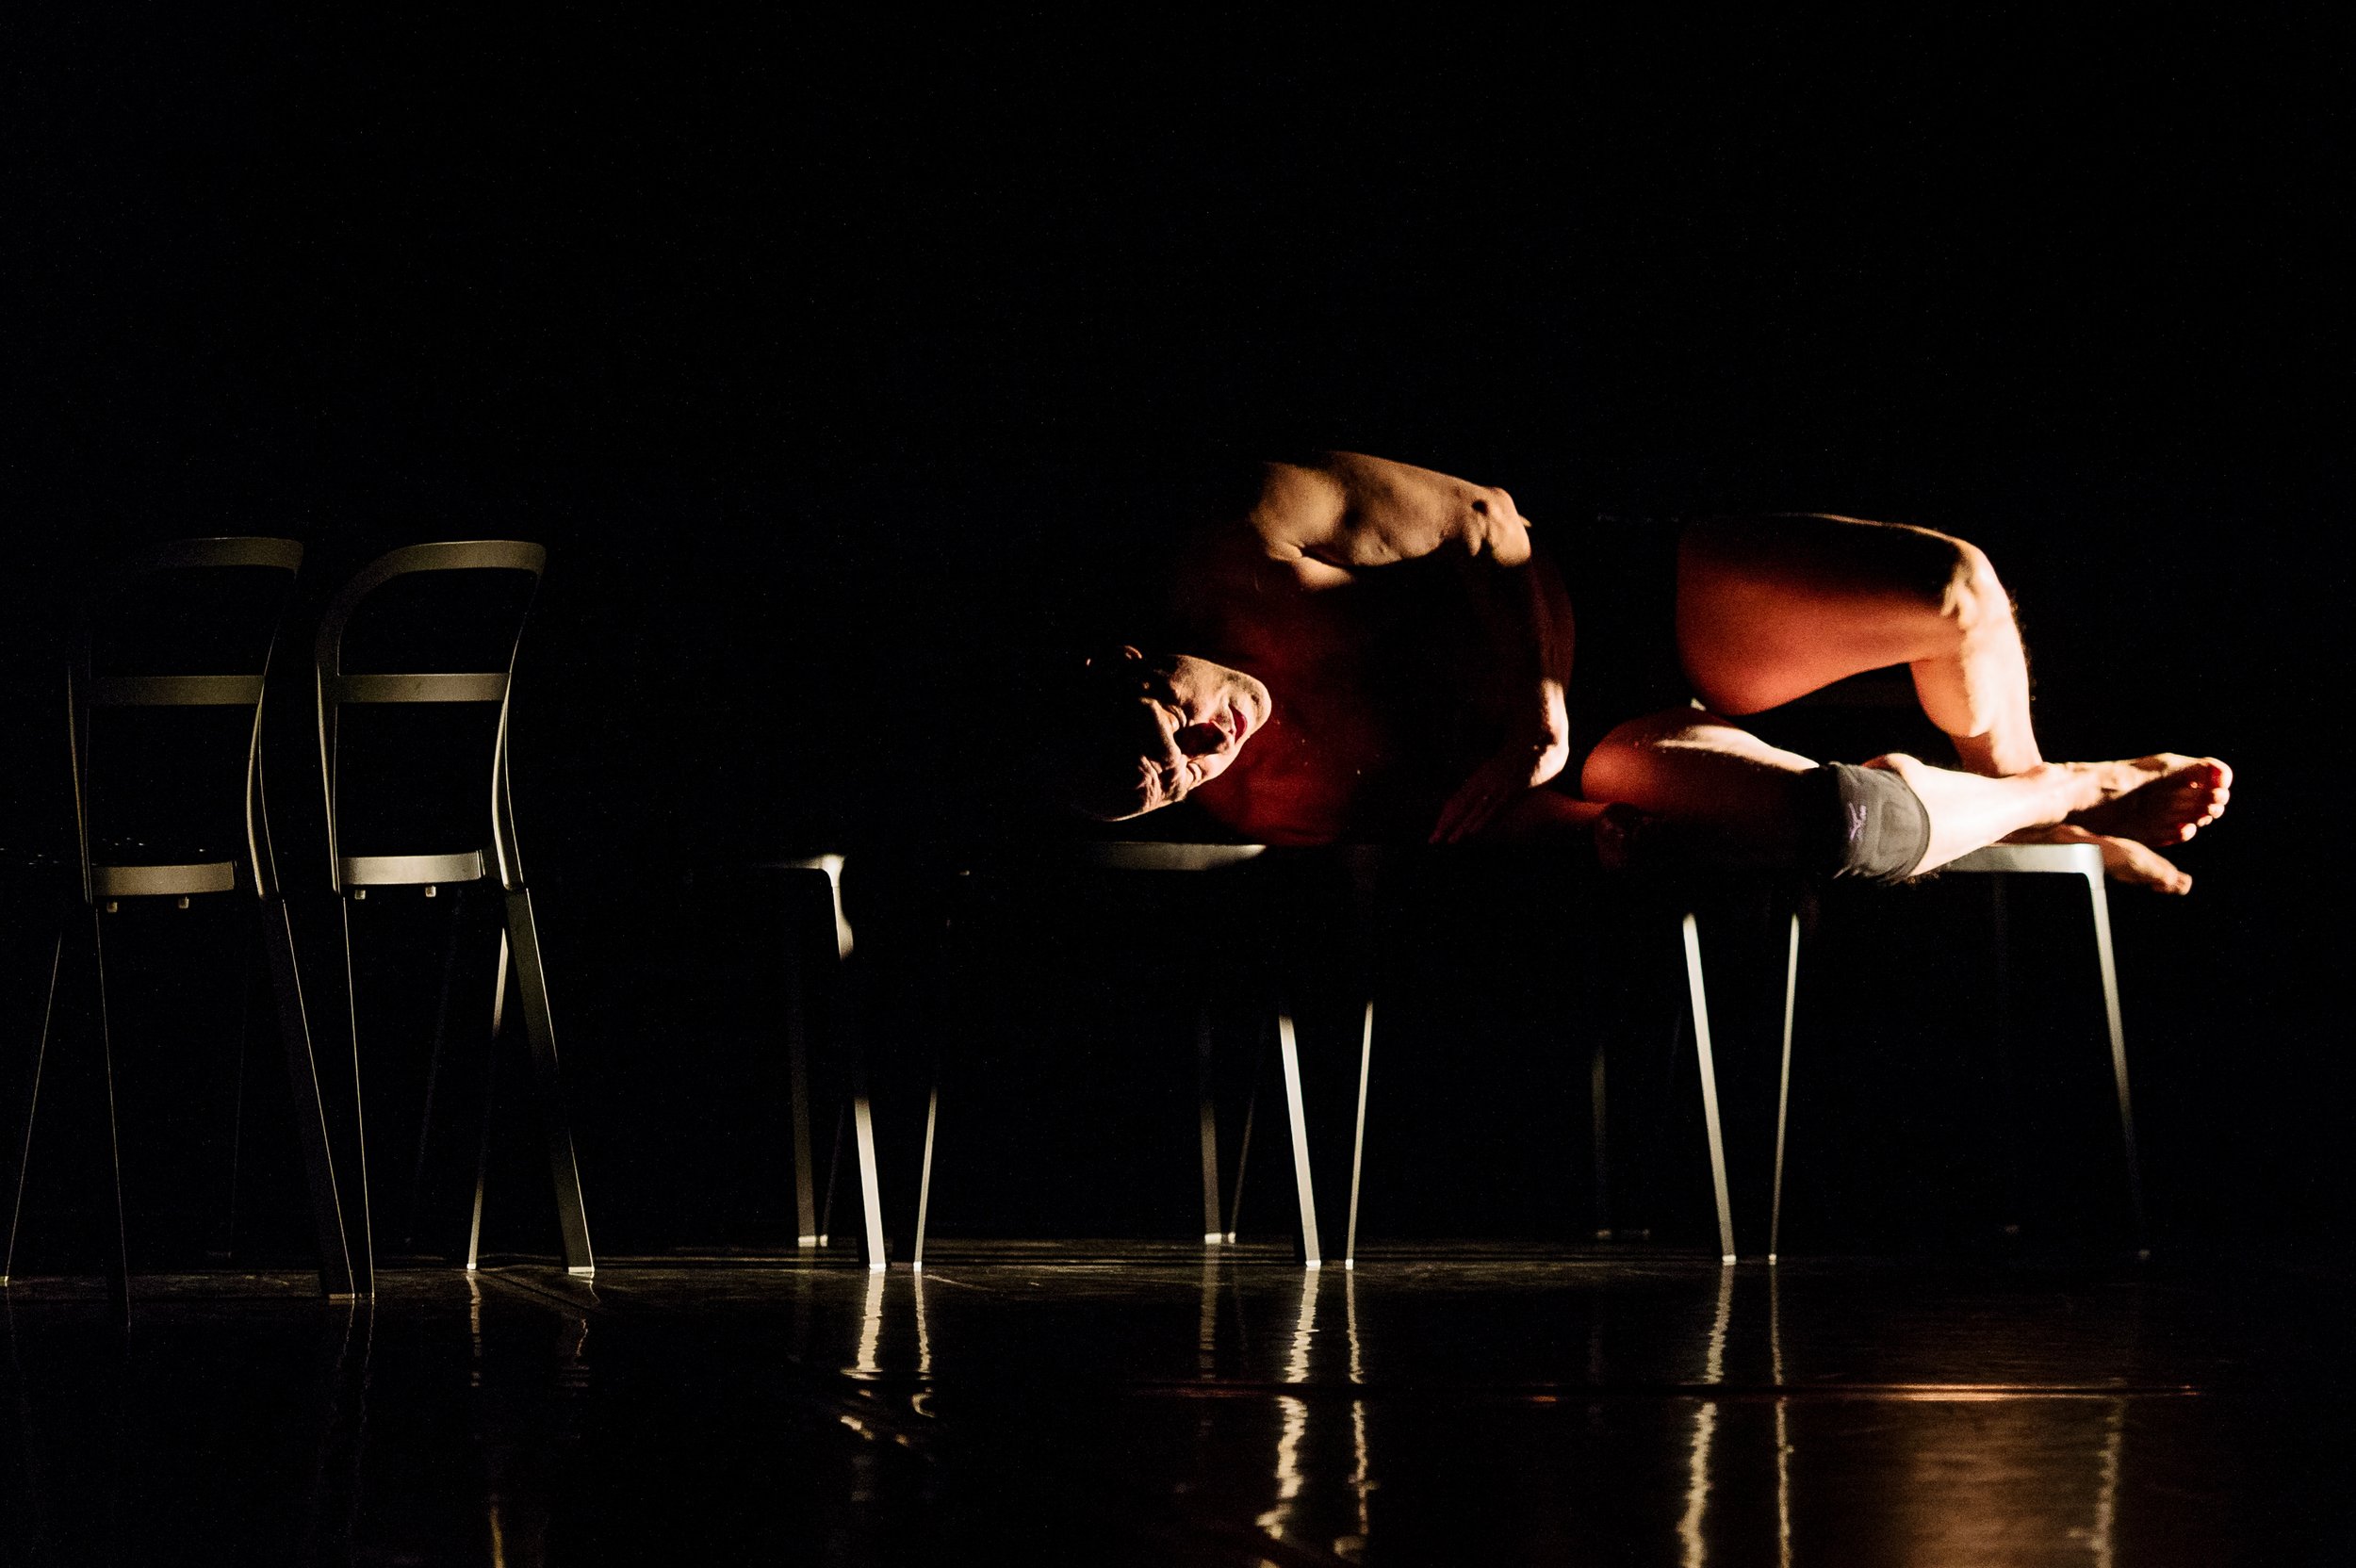 A mostly naked dancer lies across several chairs.